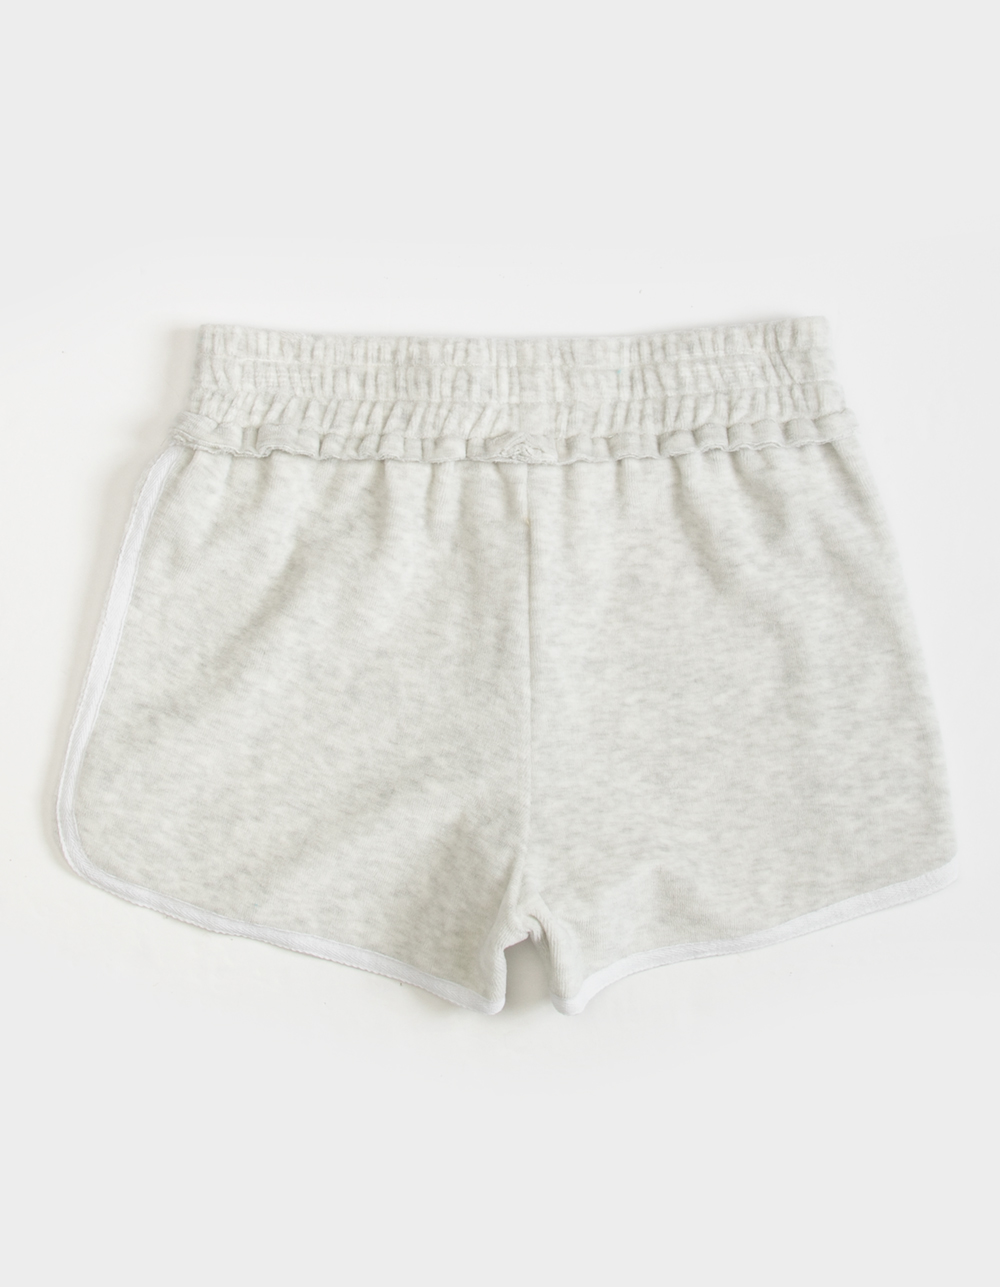 TRACTR Towel Terry Girls Track Shorts - GRAY | Tillys